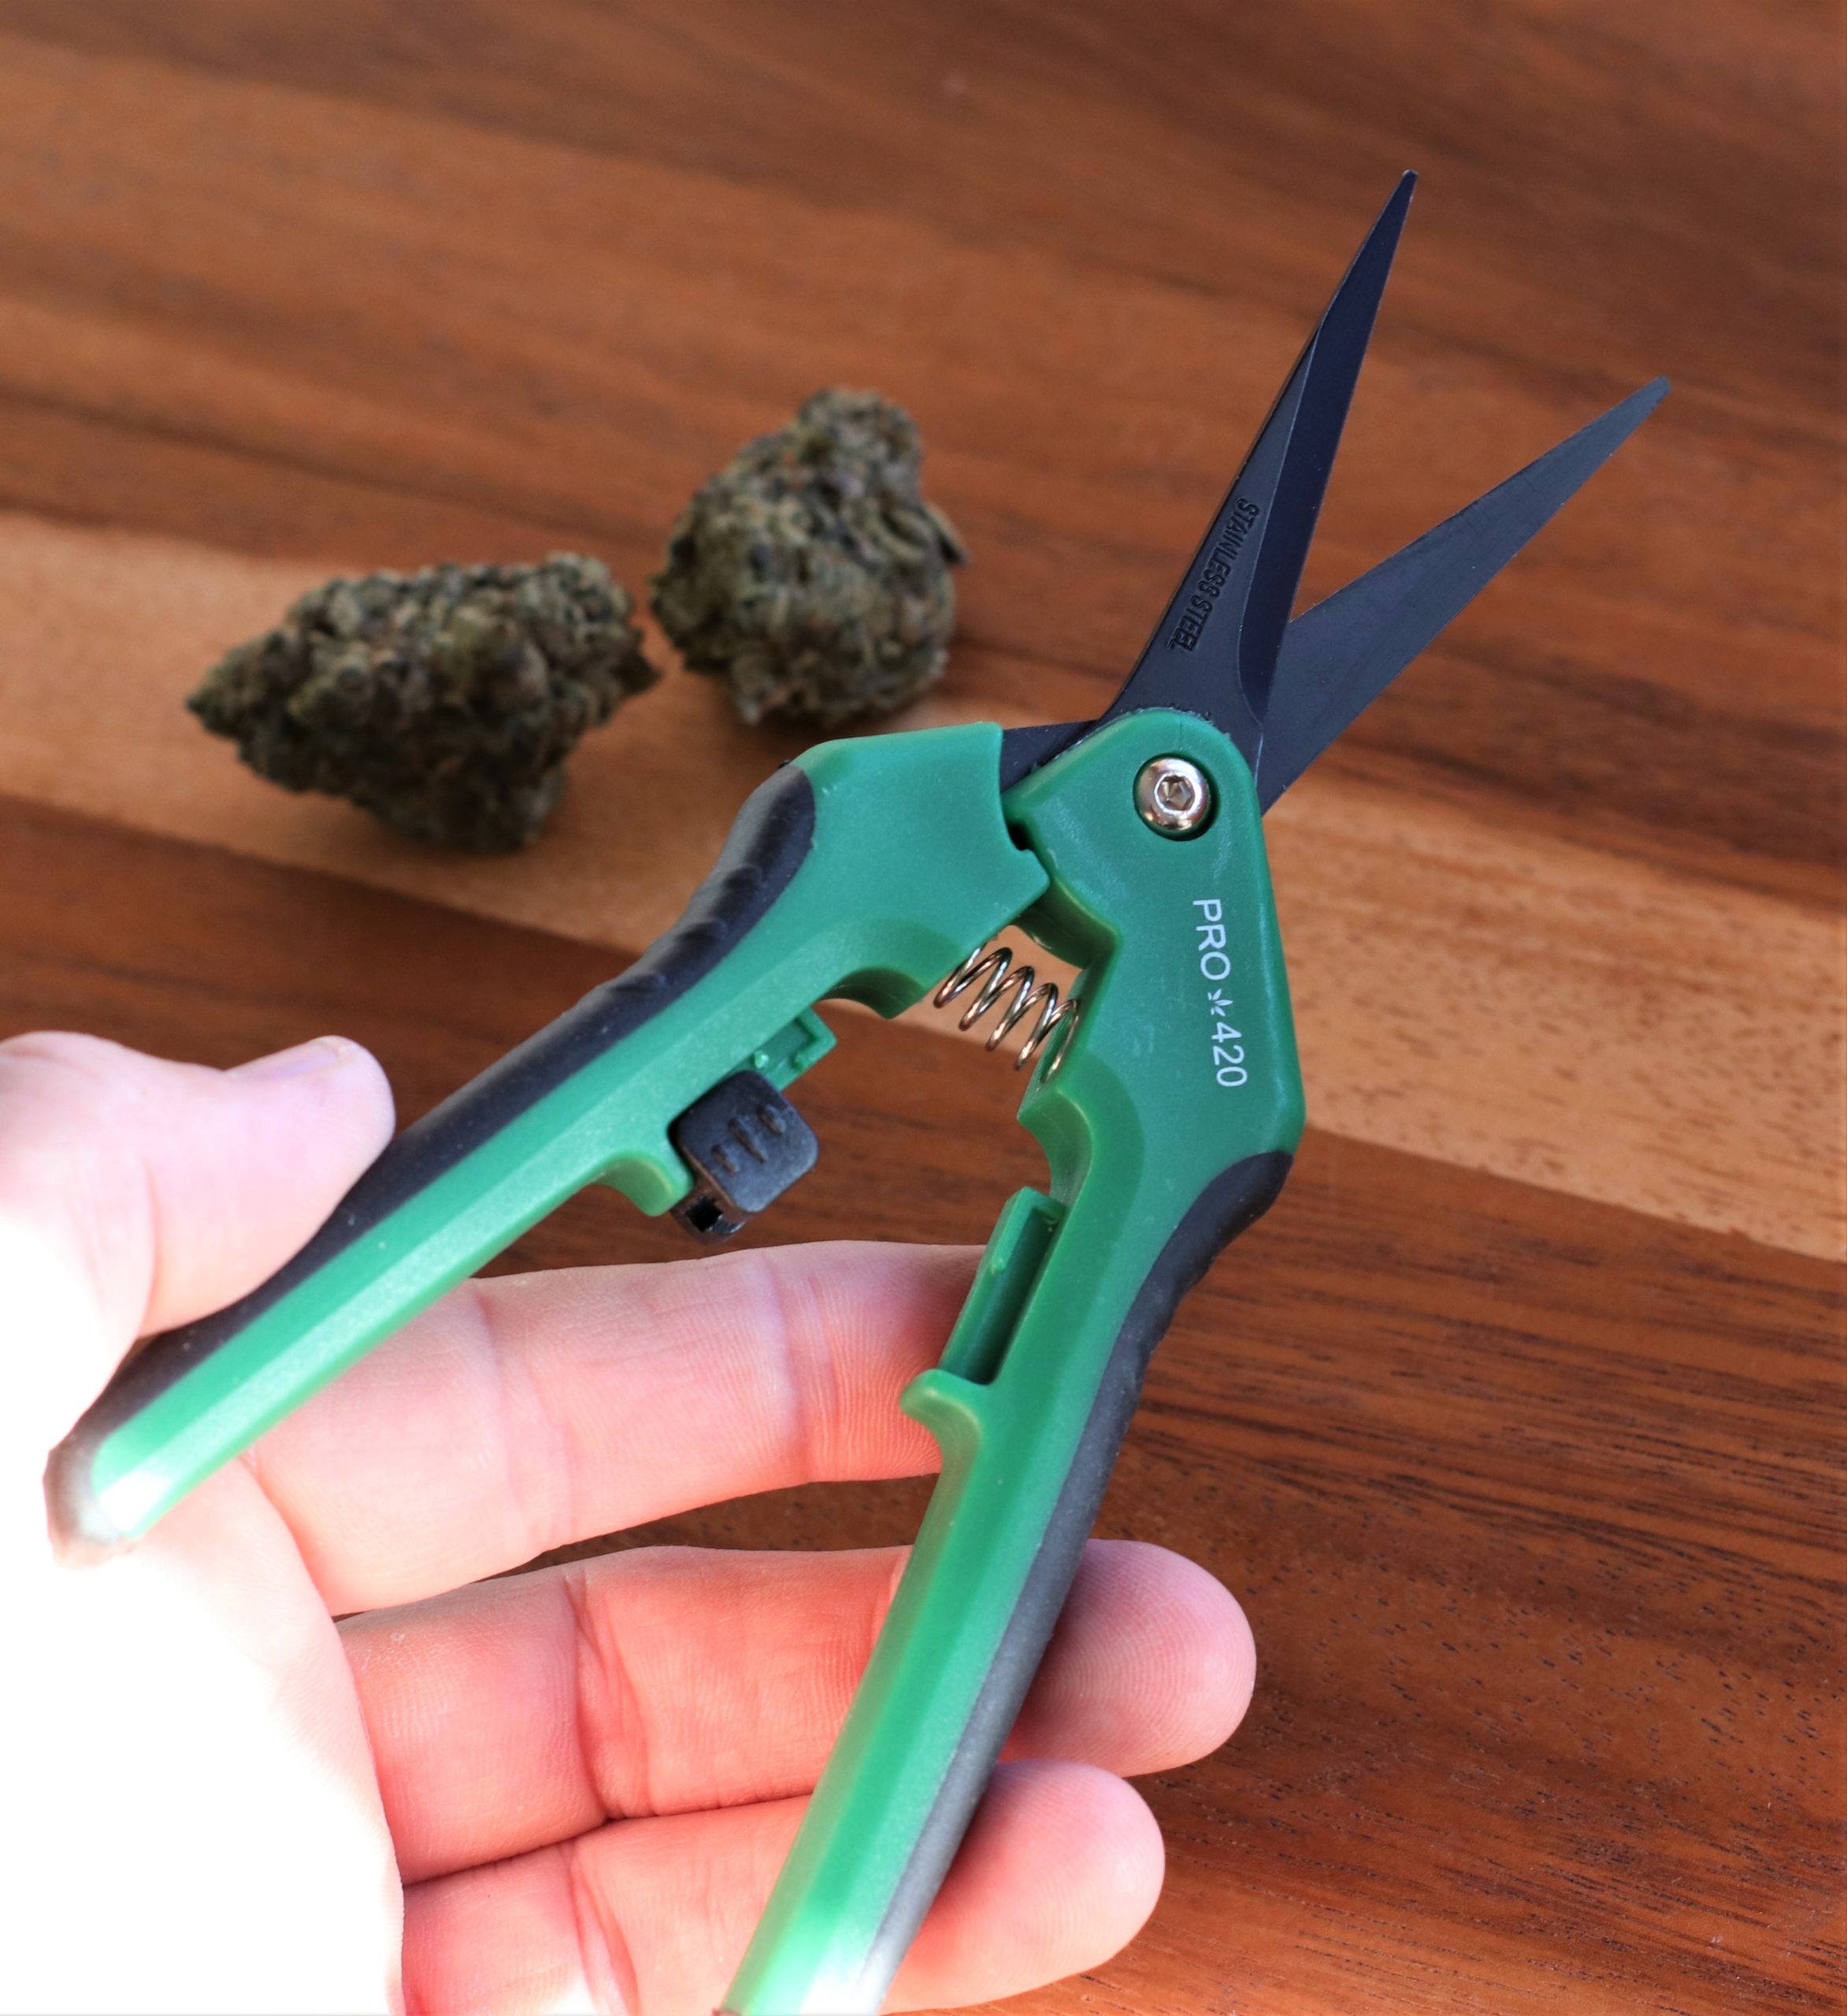 The Harvester 5-inch Cannabis Trimming Scissors